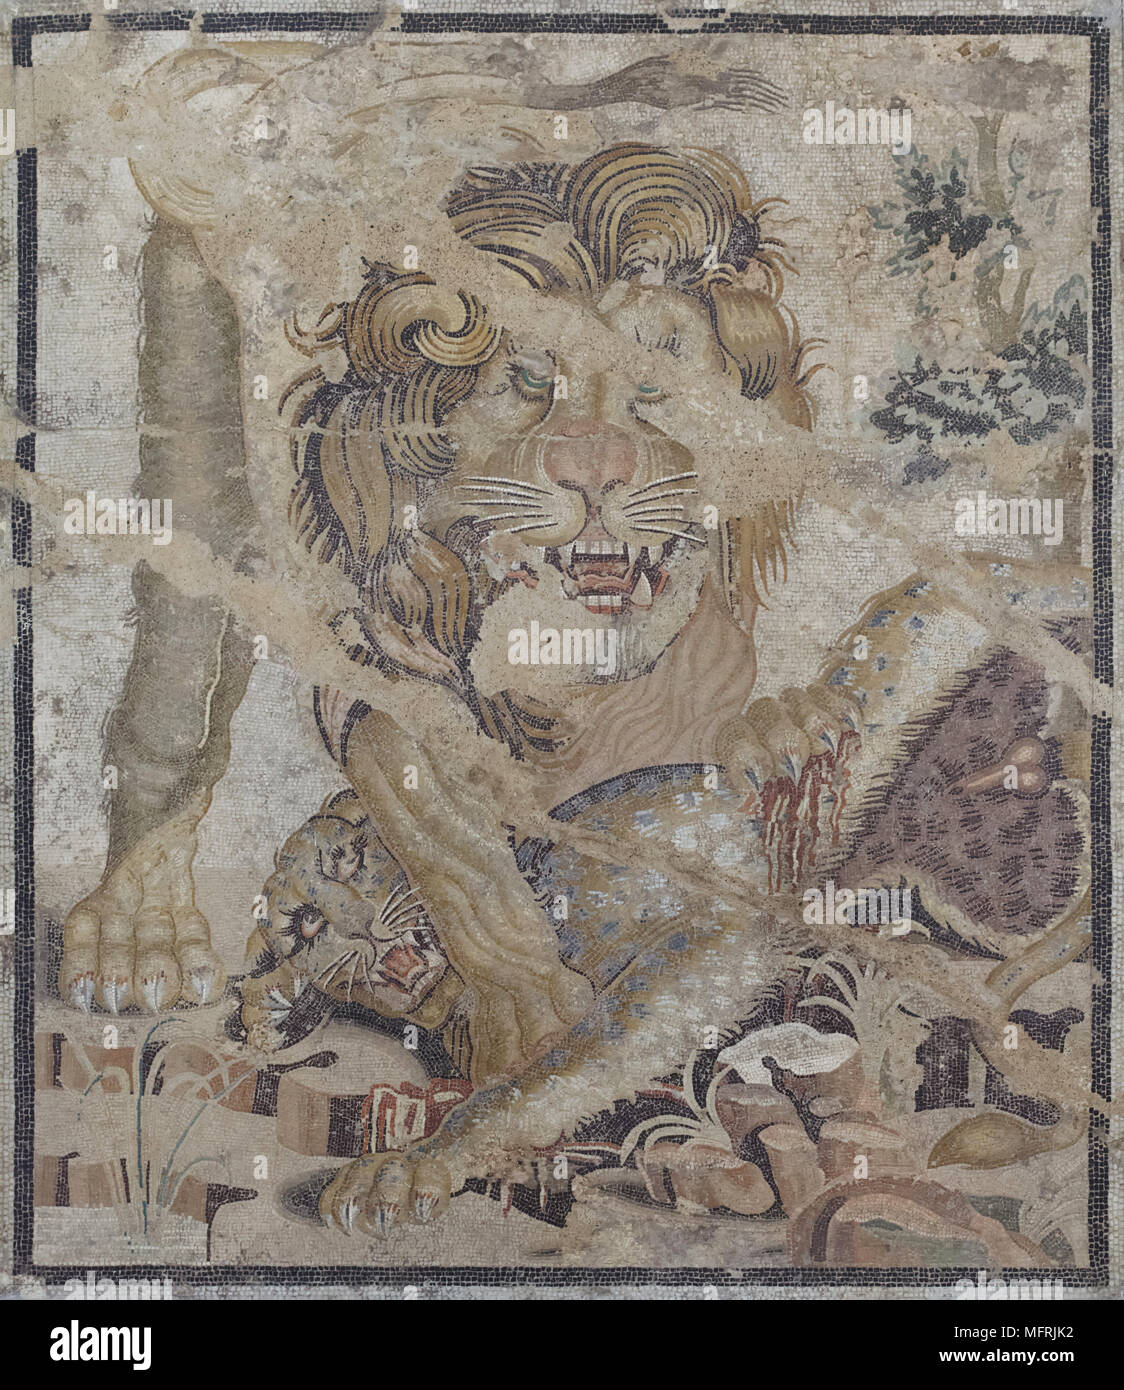 Lion and Leopard depicted in the Roman mosaic from the Casa delle Colombe a Mosaico (House of the Mosaic Doves) in Pompeii, now on display in the National Archaeological Museum (Museo Archeologico Nazionale di Napoli) in Naples, Campania, Italy. Stock Photo